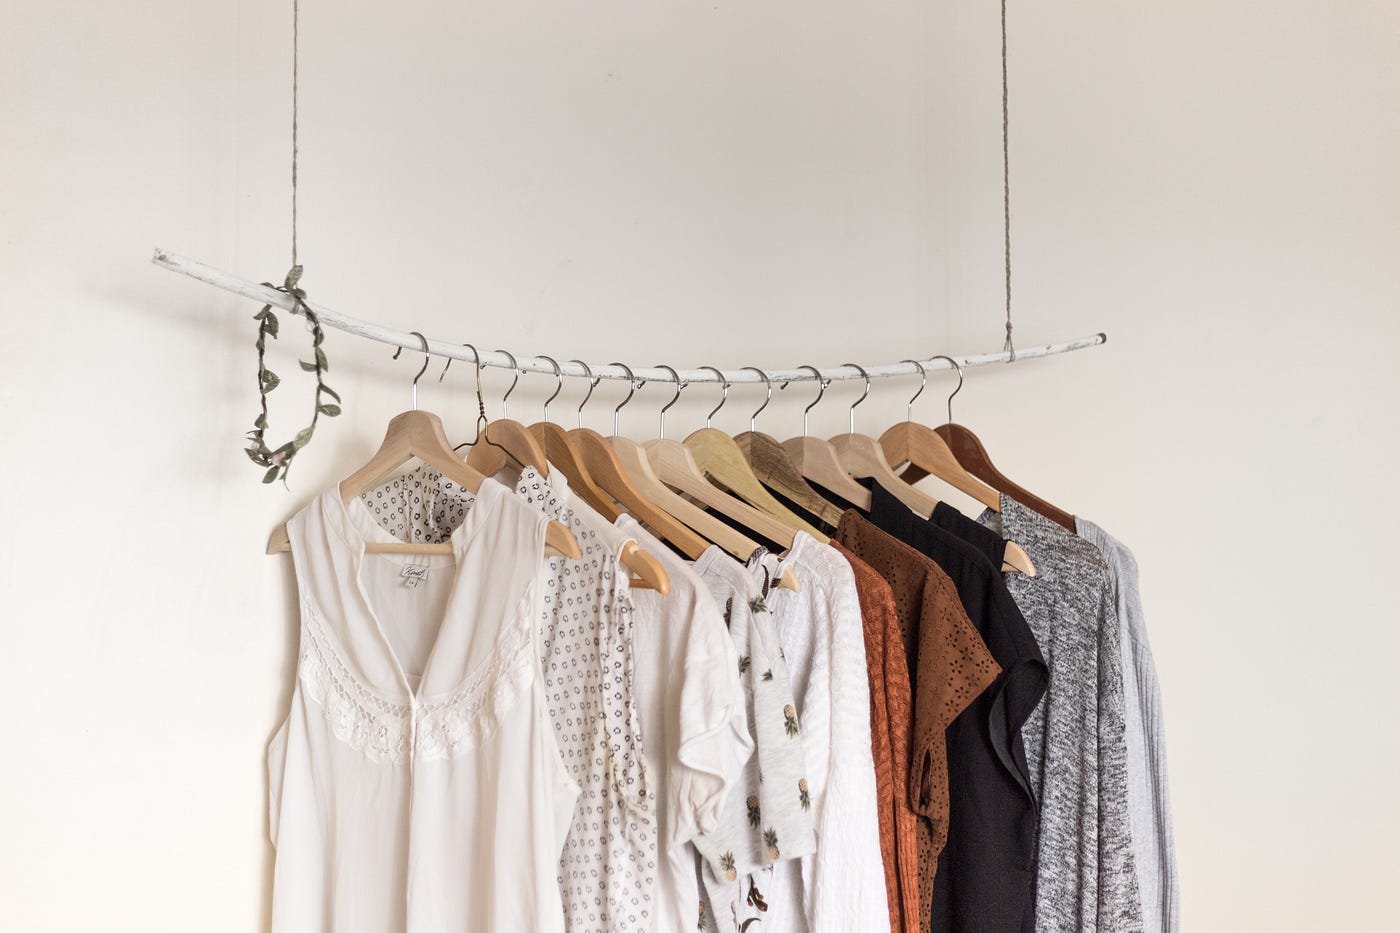 How to Buy Clothes in Bulk for Resale